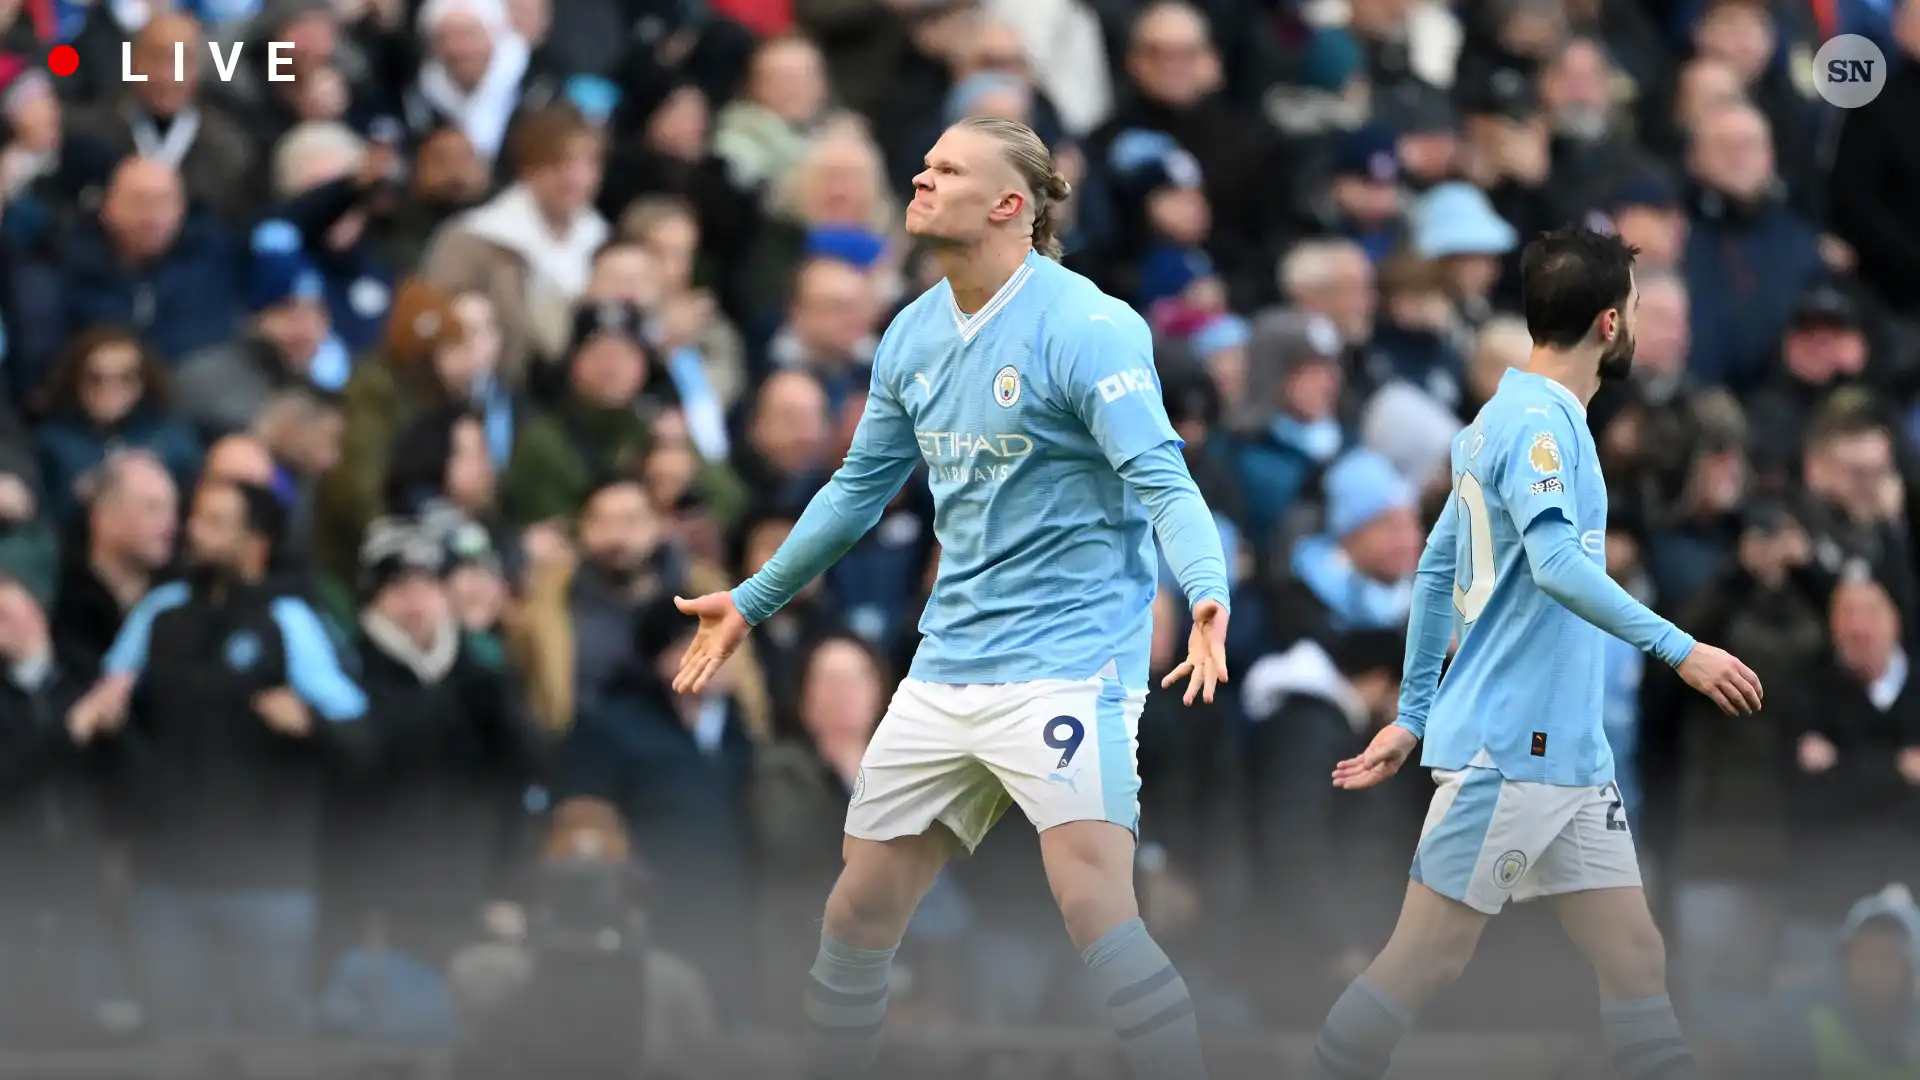 Man City vs Luton Town live score, result, updates, highlights, stats, lineups from Premier League match